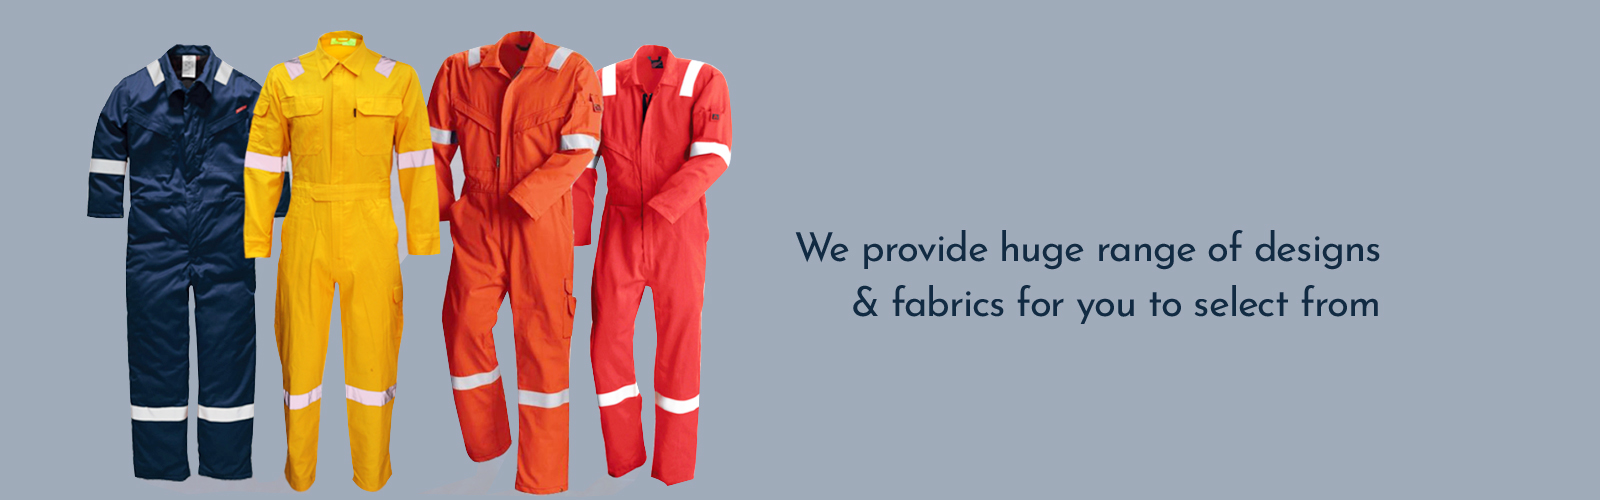 Vinit Global LLP- Manufacturer and Exporter of Garments